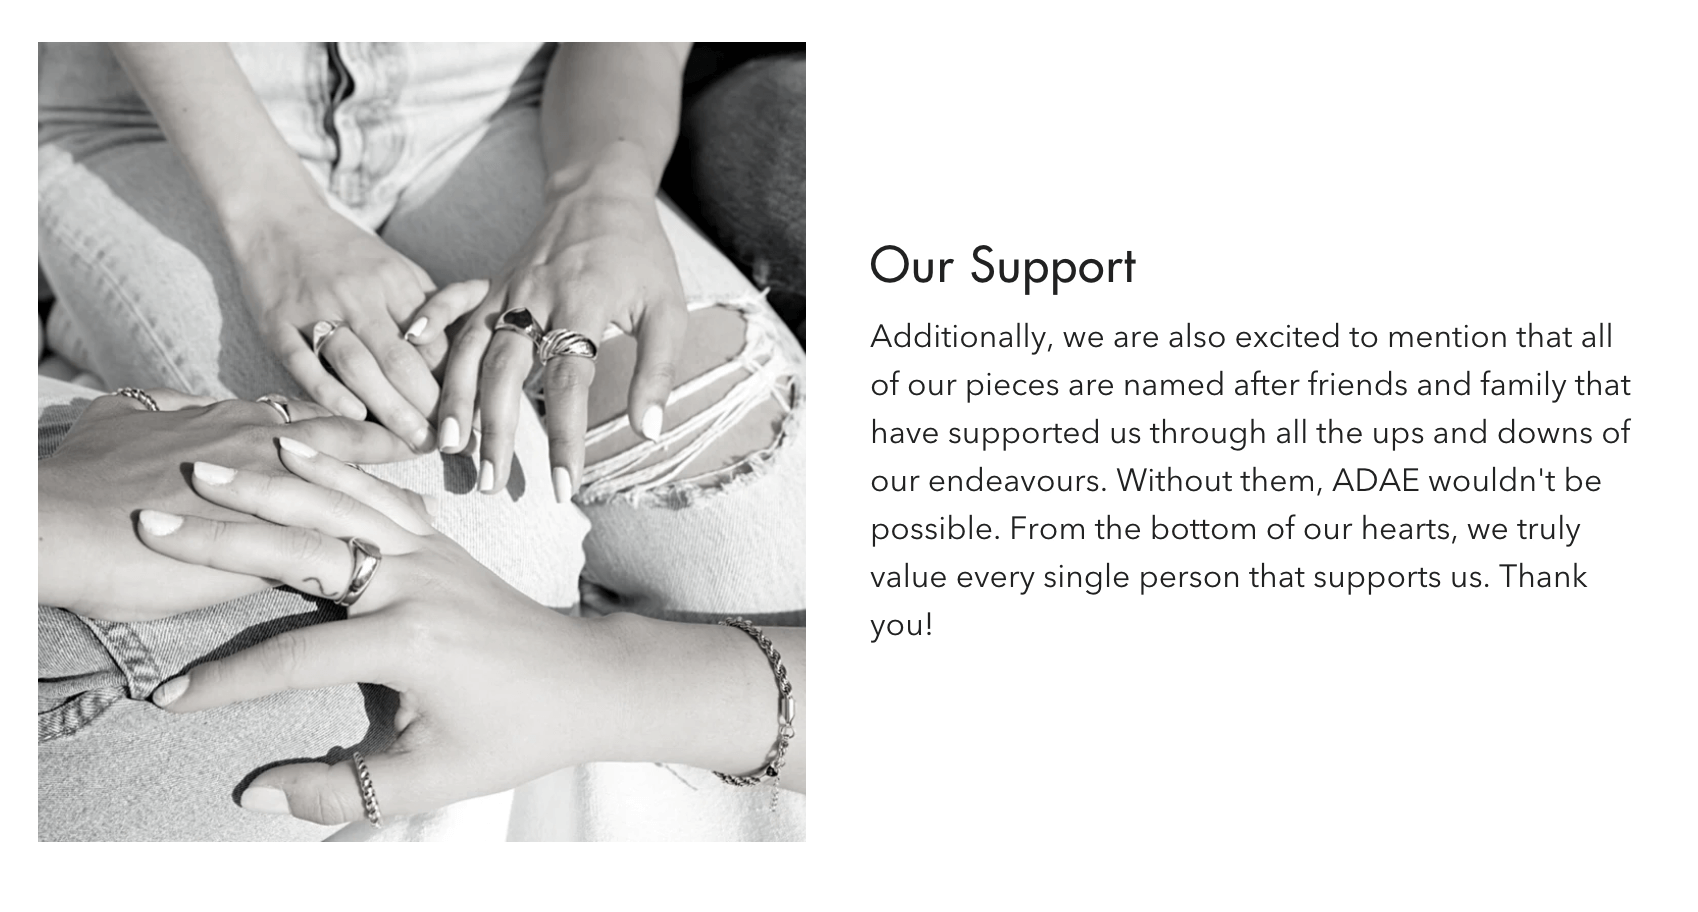 A screenshot from ADAE’s About page. There is a black and white image of four hands linked together, decorated in rings and bracelets. The text beside the image says: Our Support. Additionally, we are also excited to mention that all of our pieces are named after friends and family that have supported us through all the ups and downs of our endeavors. Without them, ADAE wouldn't be possible. From the bottom of our hearts, we truly value every single person that supports us. Thank you!